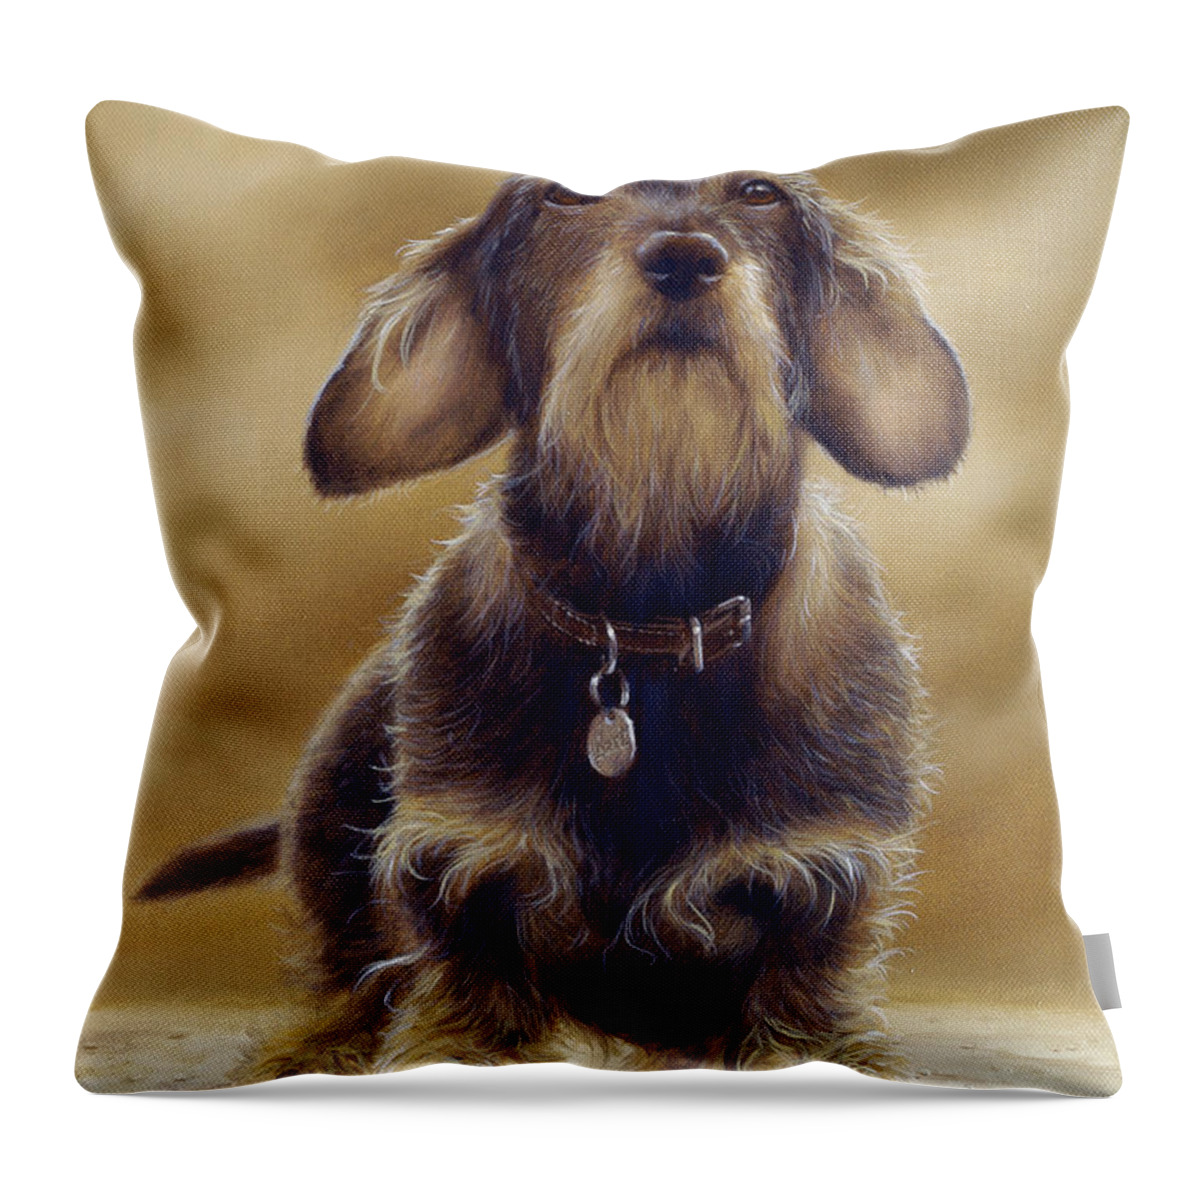 Dog Paintings Throw Pillow featuring the painting Wire Haired Dachshund by John Silver